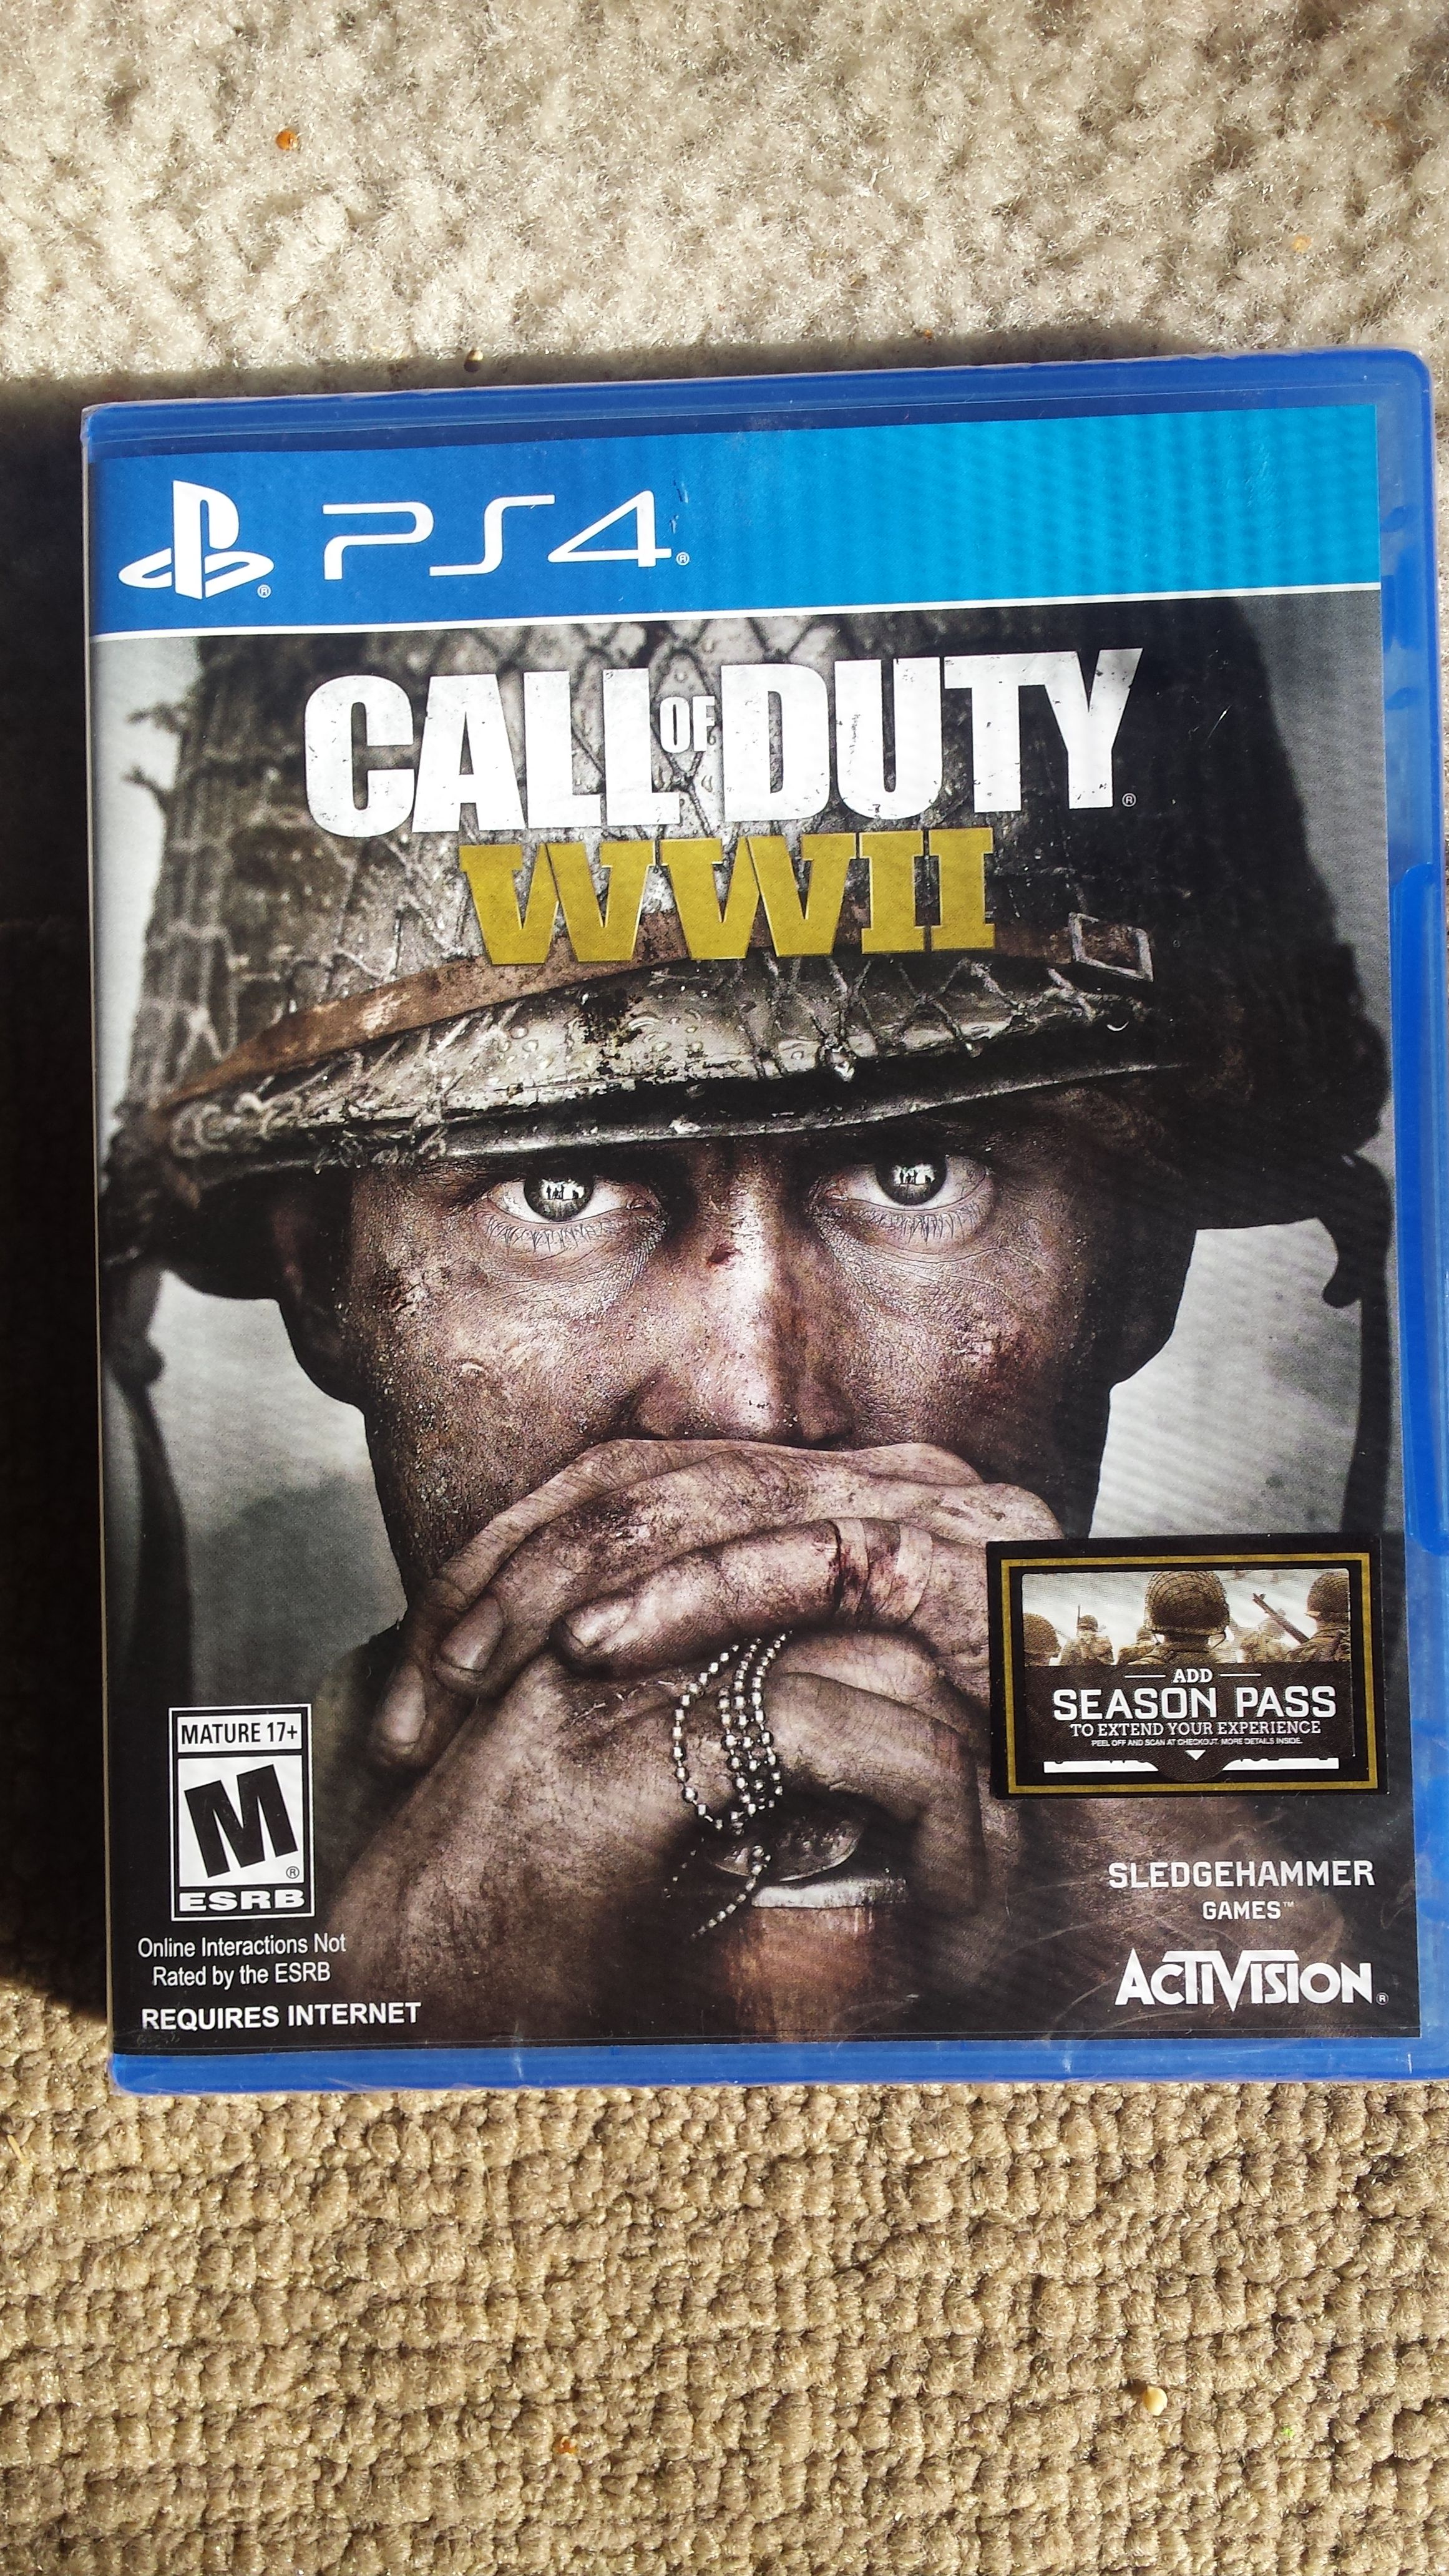 Brand new PS4 CALL OF DUTY WWII